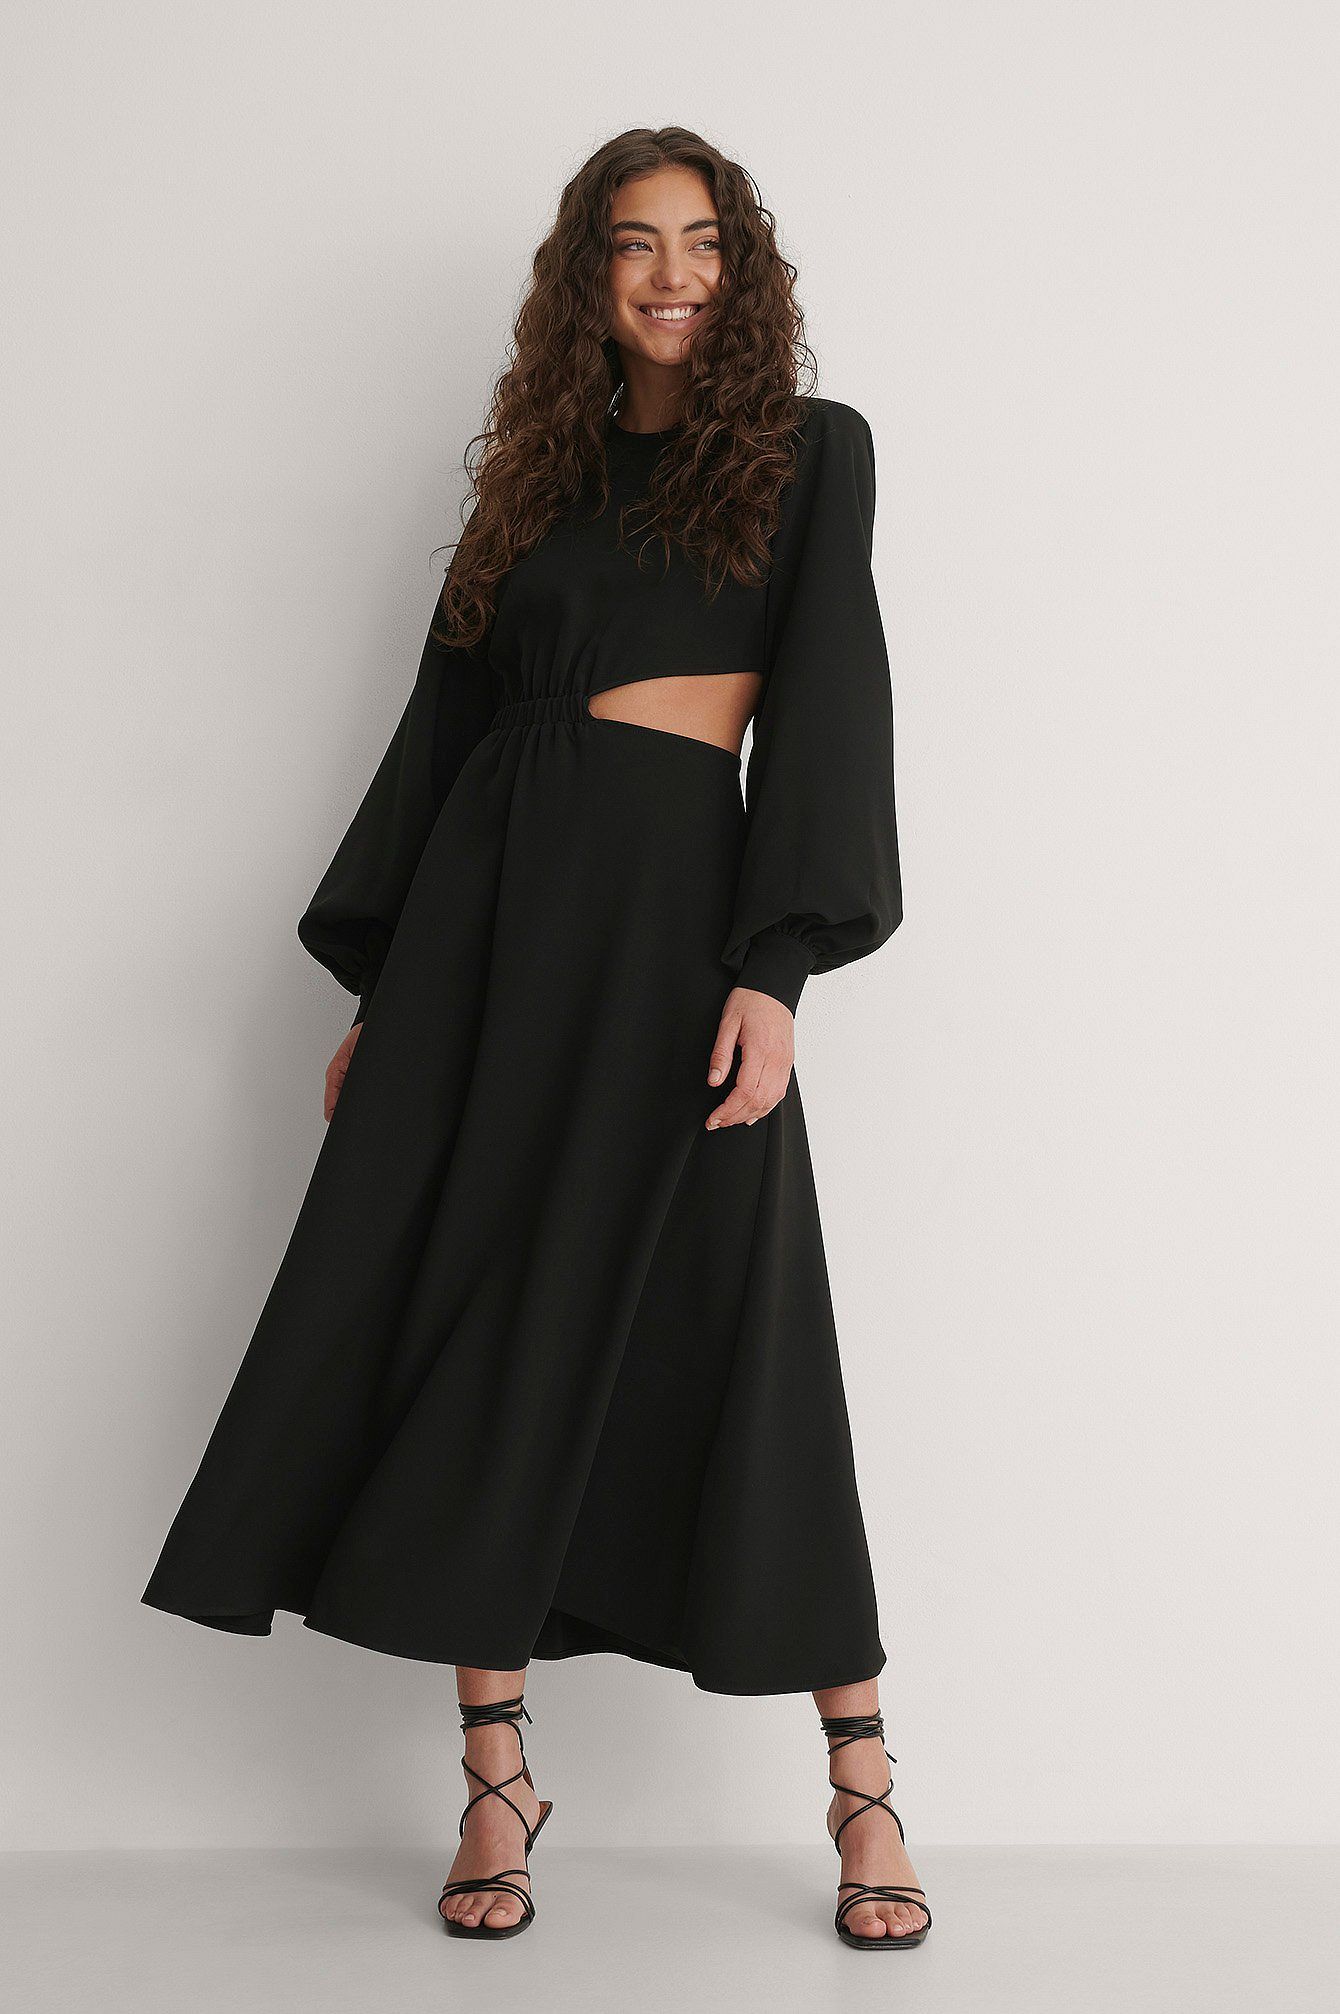 Black Midi dress with long full sleeves that taper at the wrist. Round neck and nipped in waist with a side cut out over the waist revealing a little skin. 